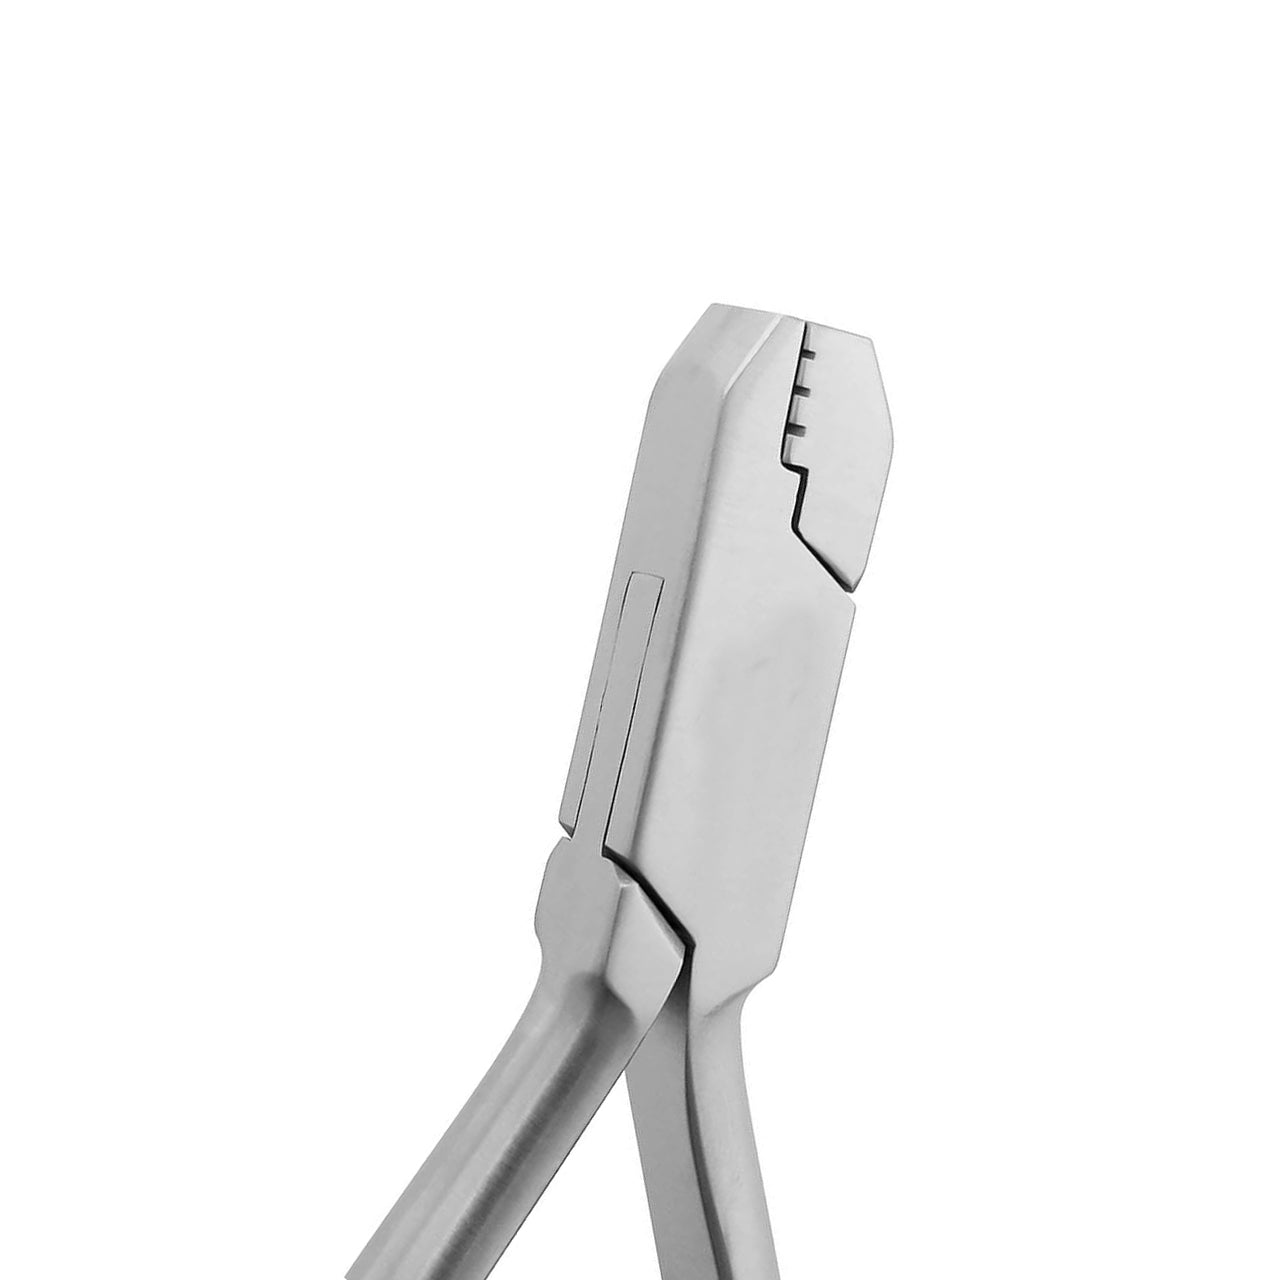 Arch Contouring Pliers